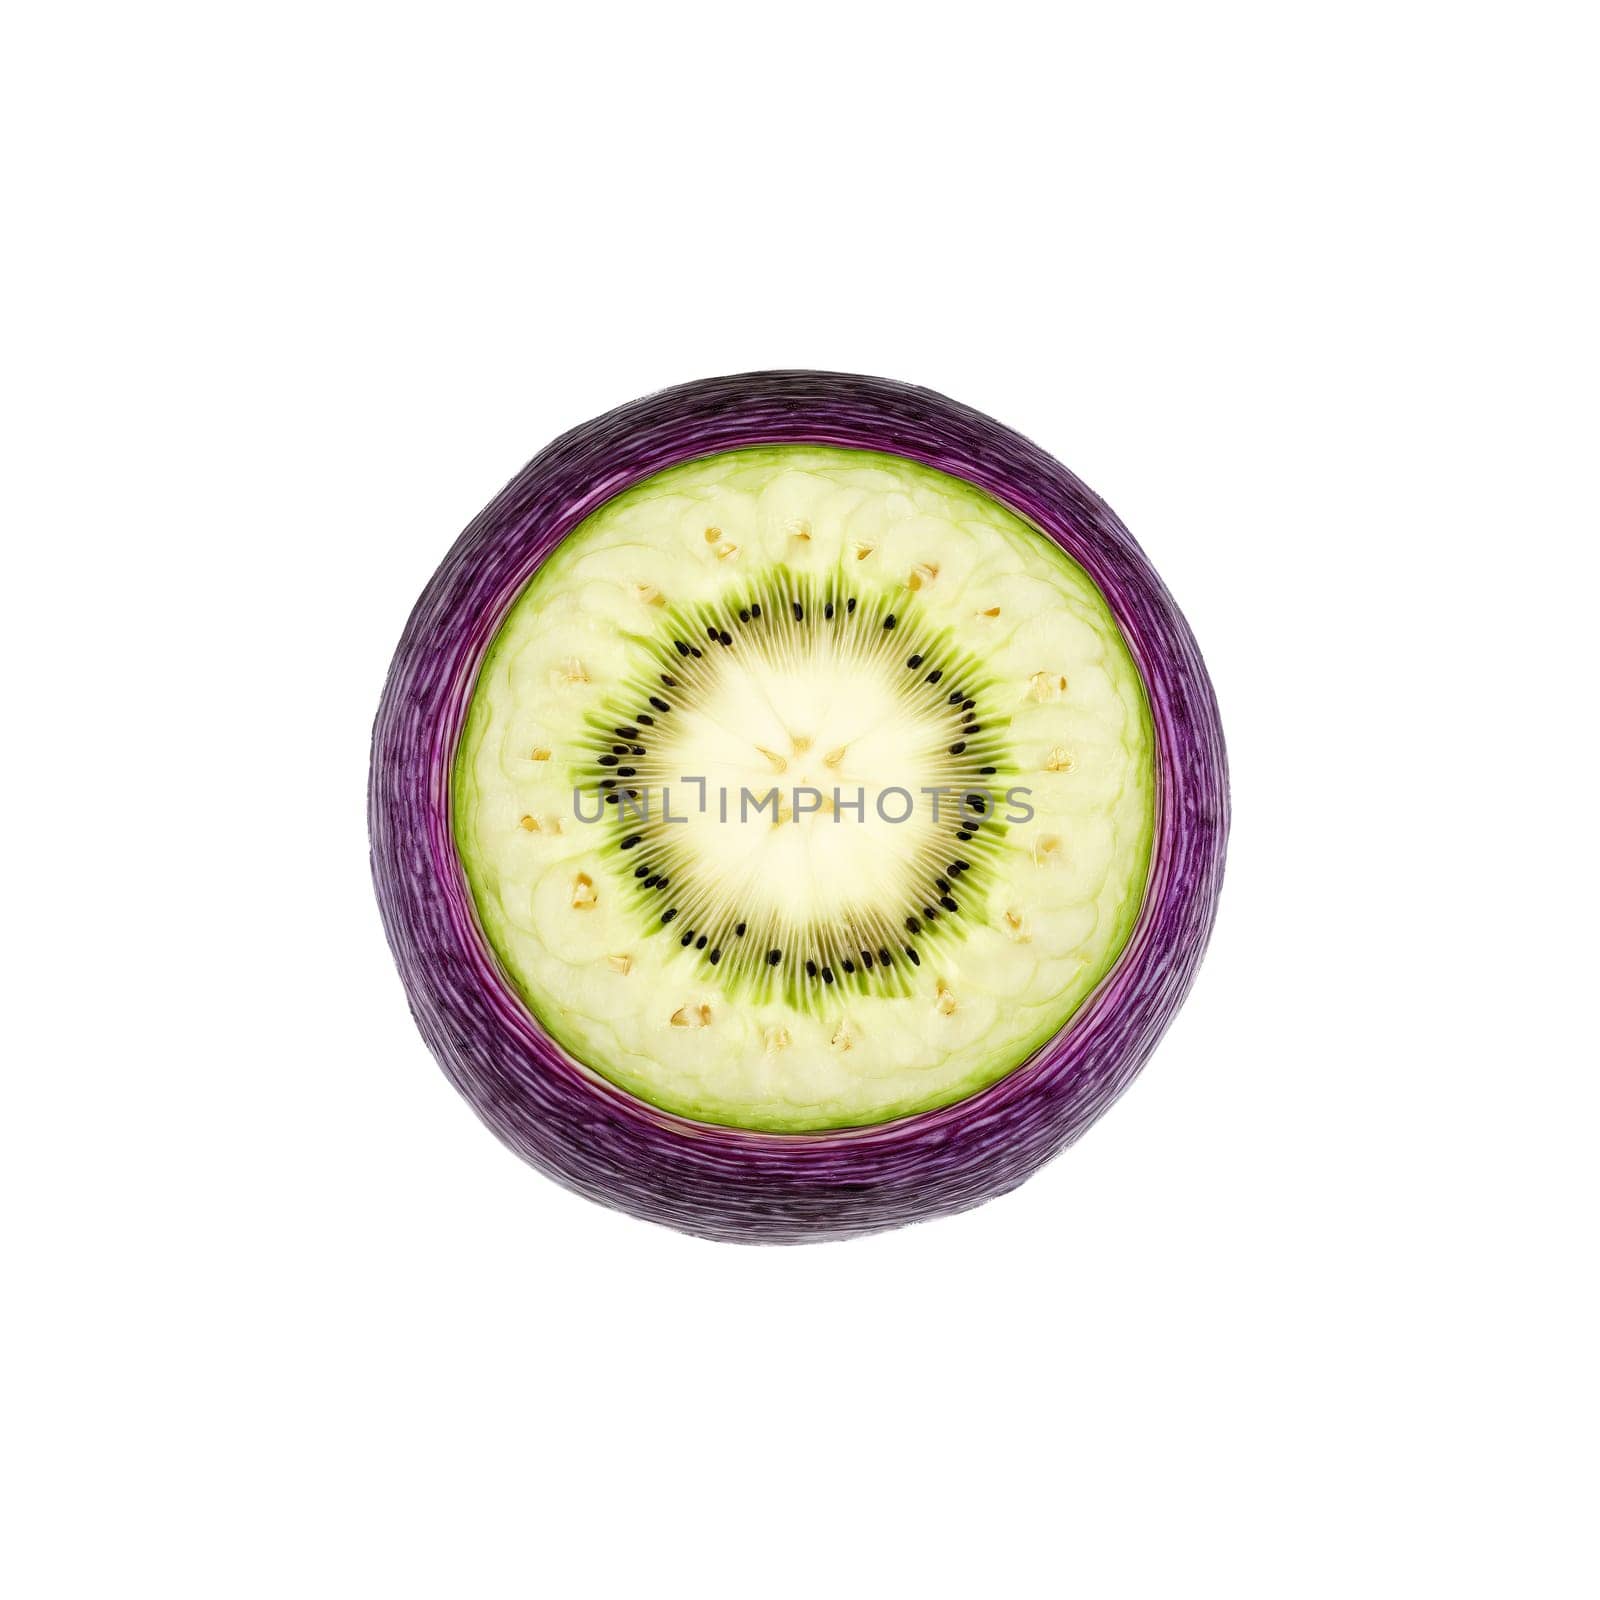 Kohlrabi with sliced rounds and purple skin in dynamic arrangement Food and culinary concept by panophotograph